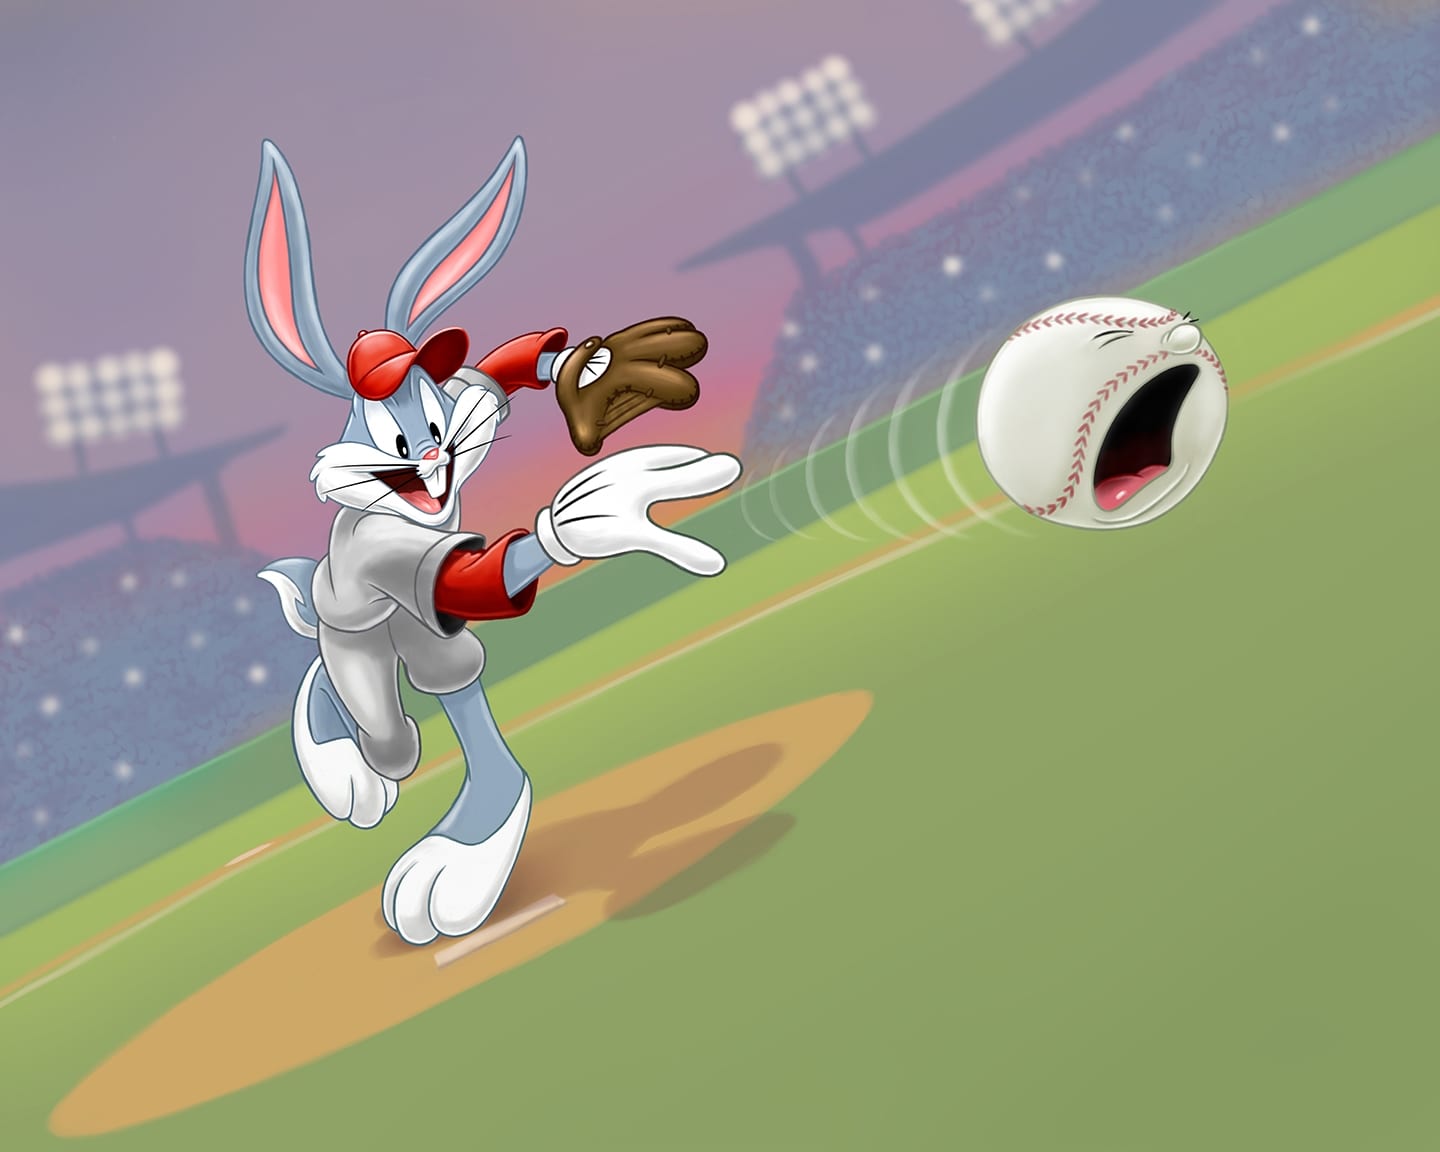 “Pachydermus Percussion Pitch” Bugs Bunny, dressed up as a pitcher, throwing a fastball so fast that the ball is crying. 